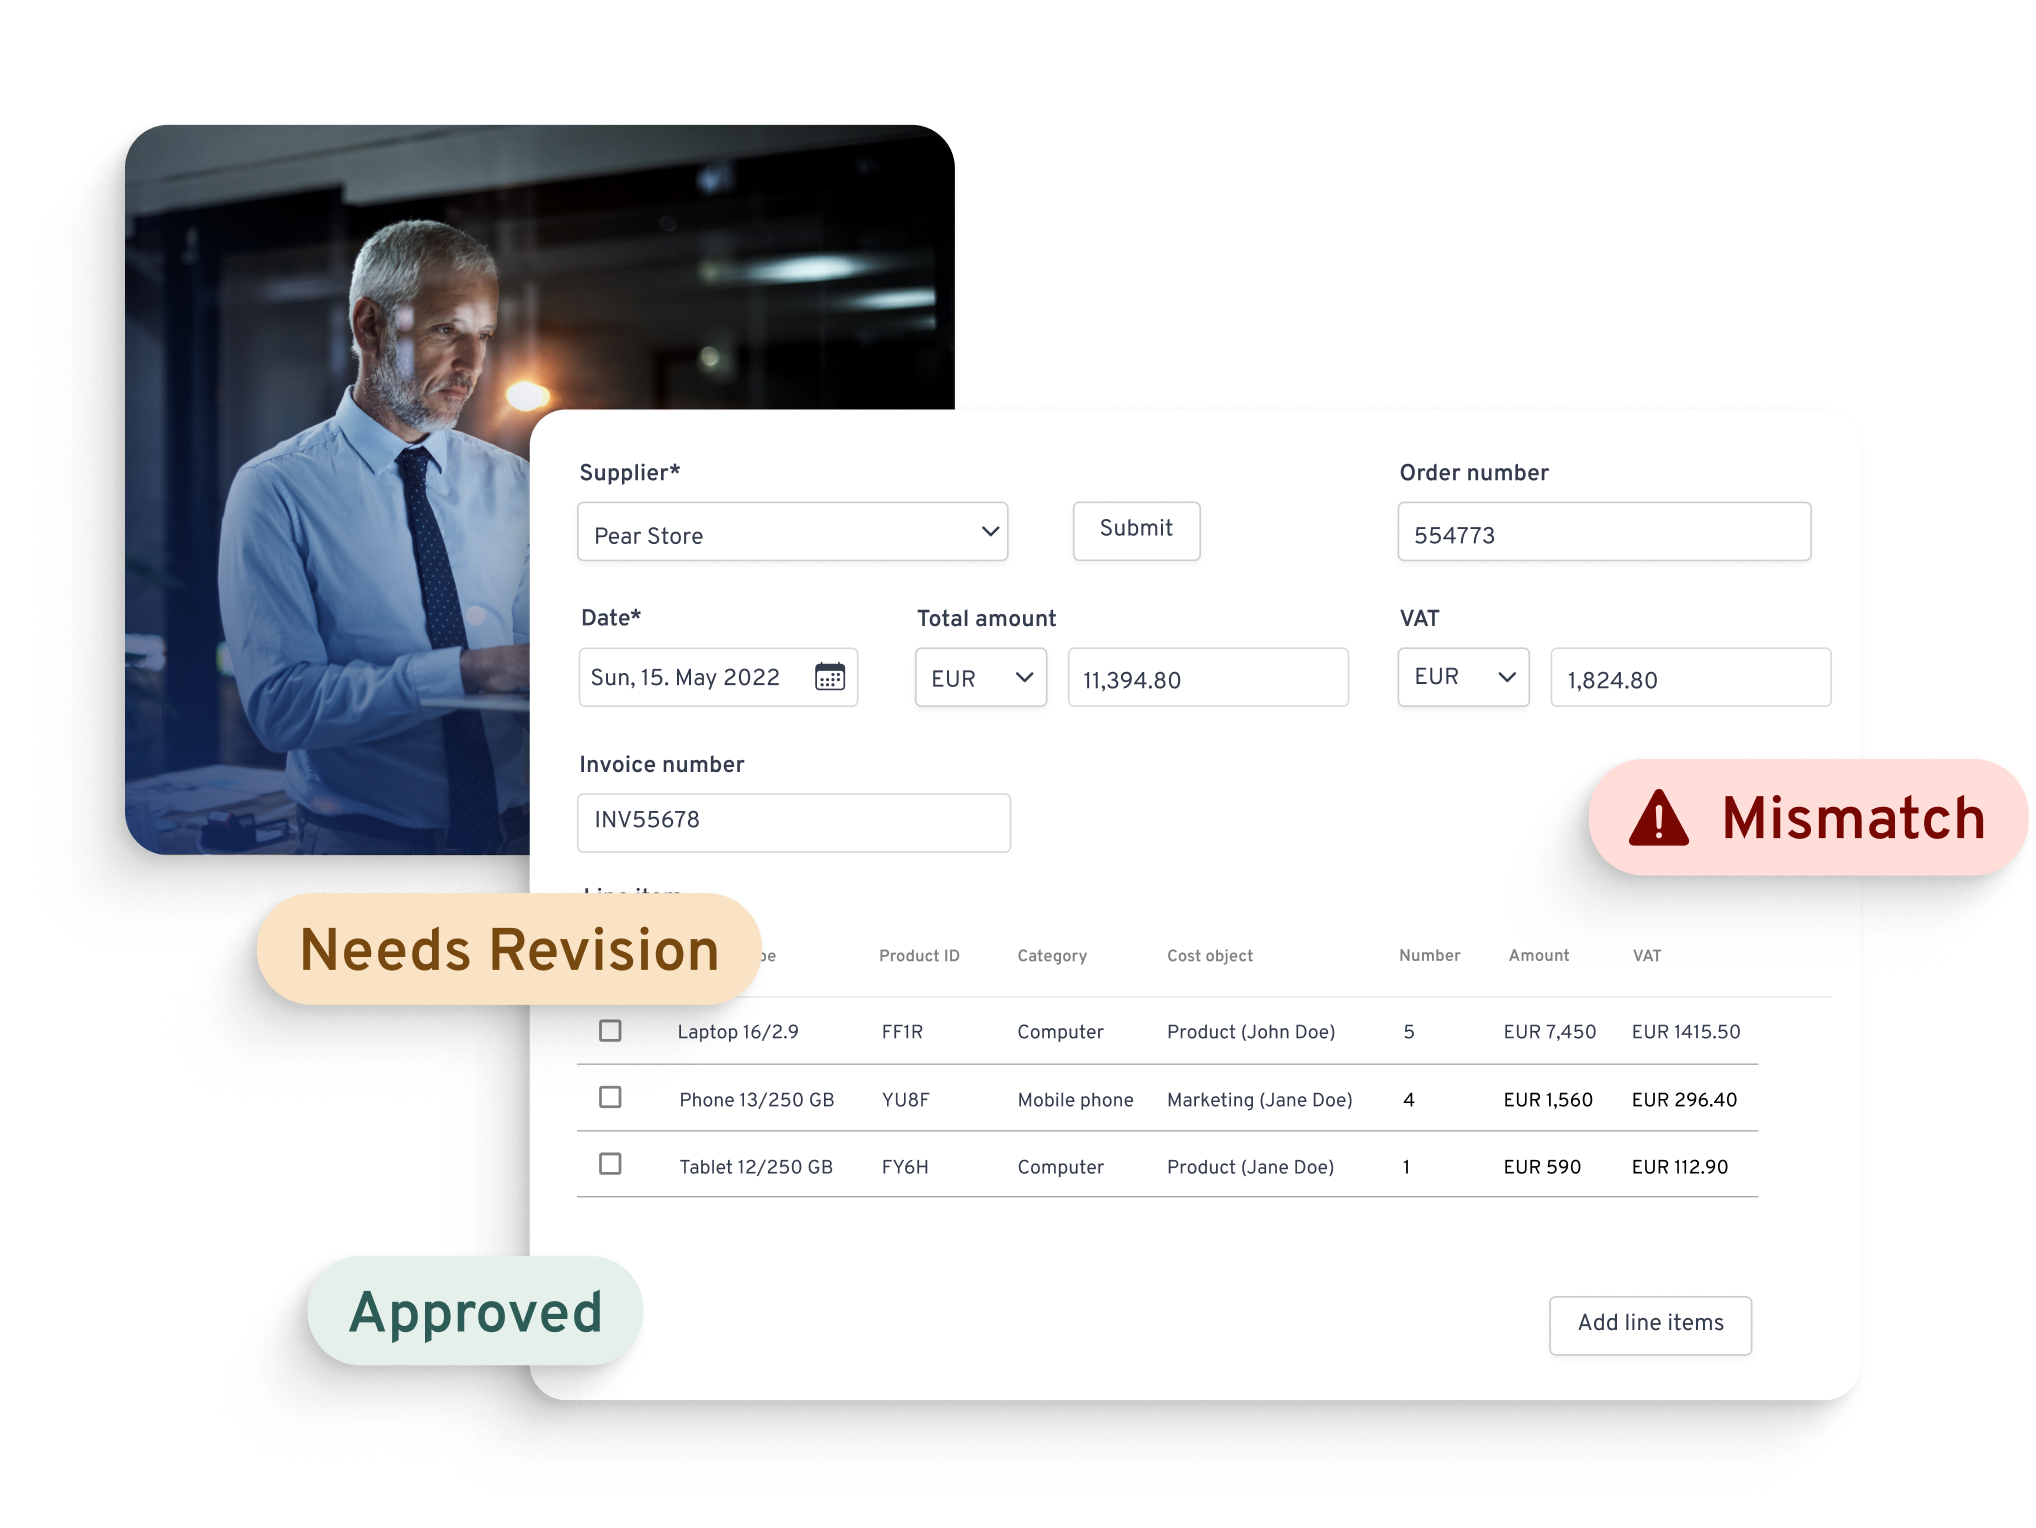 Yokoy Software - Process invoices automatically.​ Consolidate your accounts payable process, manage invoices at scale, automate approvals with custom workflows, and pay on time with Yokoy’s AI-powered invoice management solution.